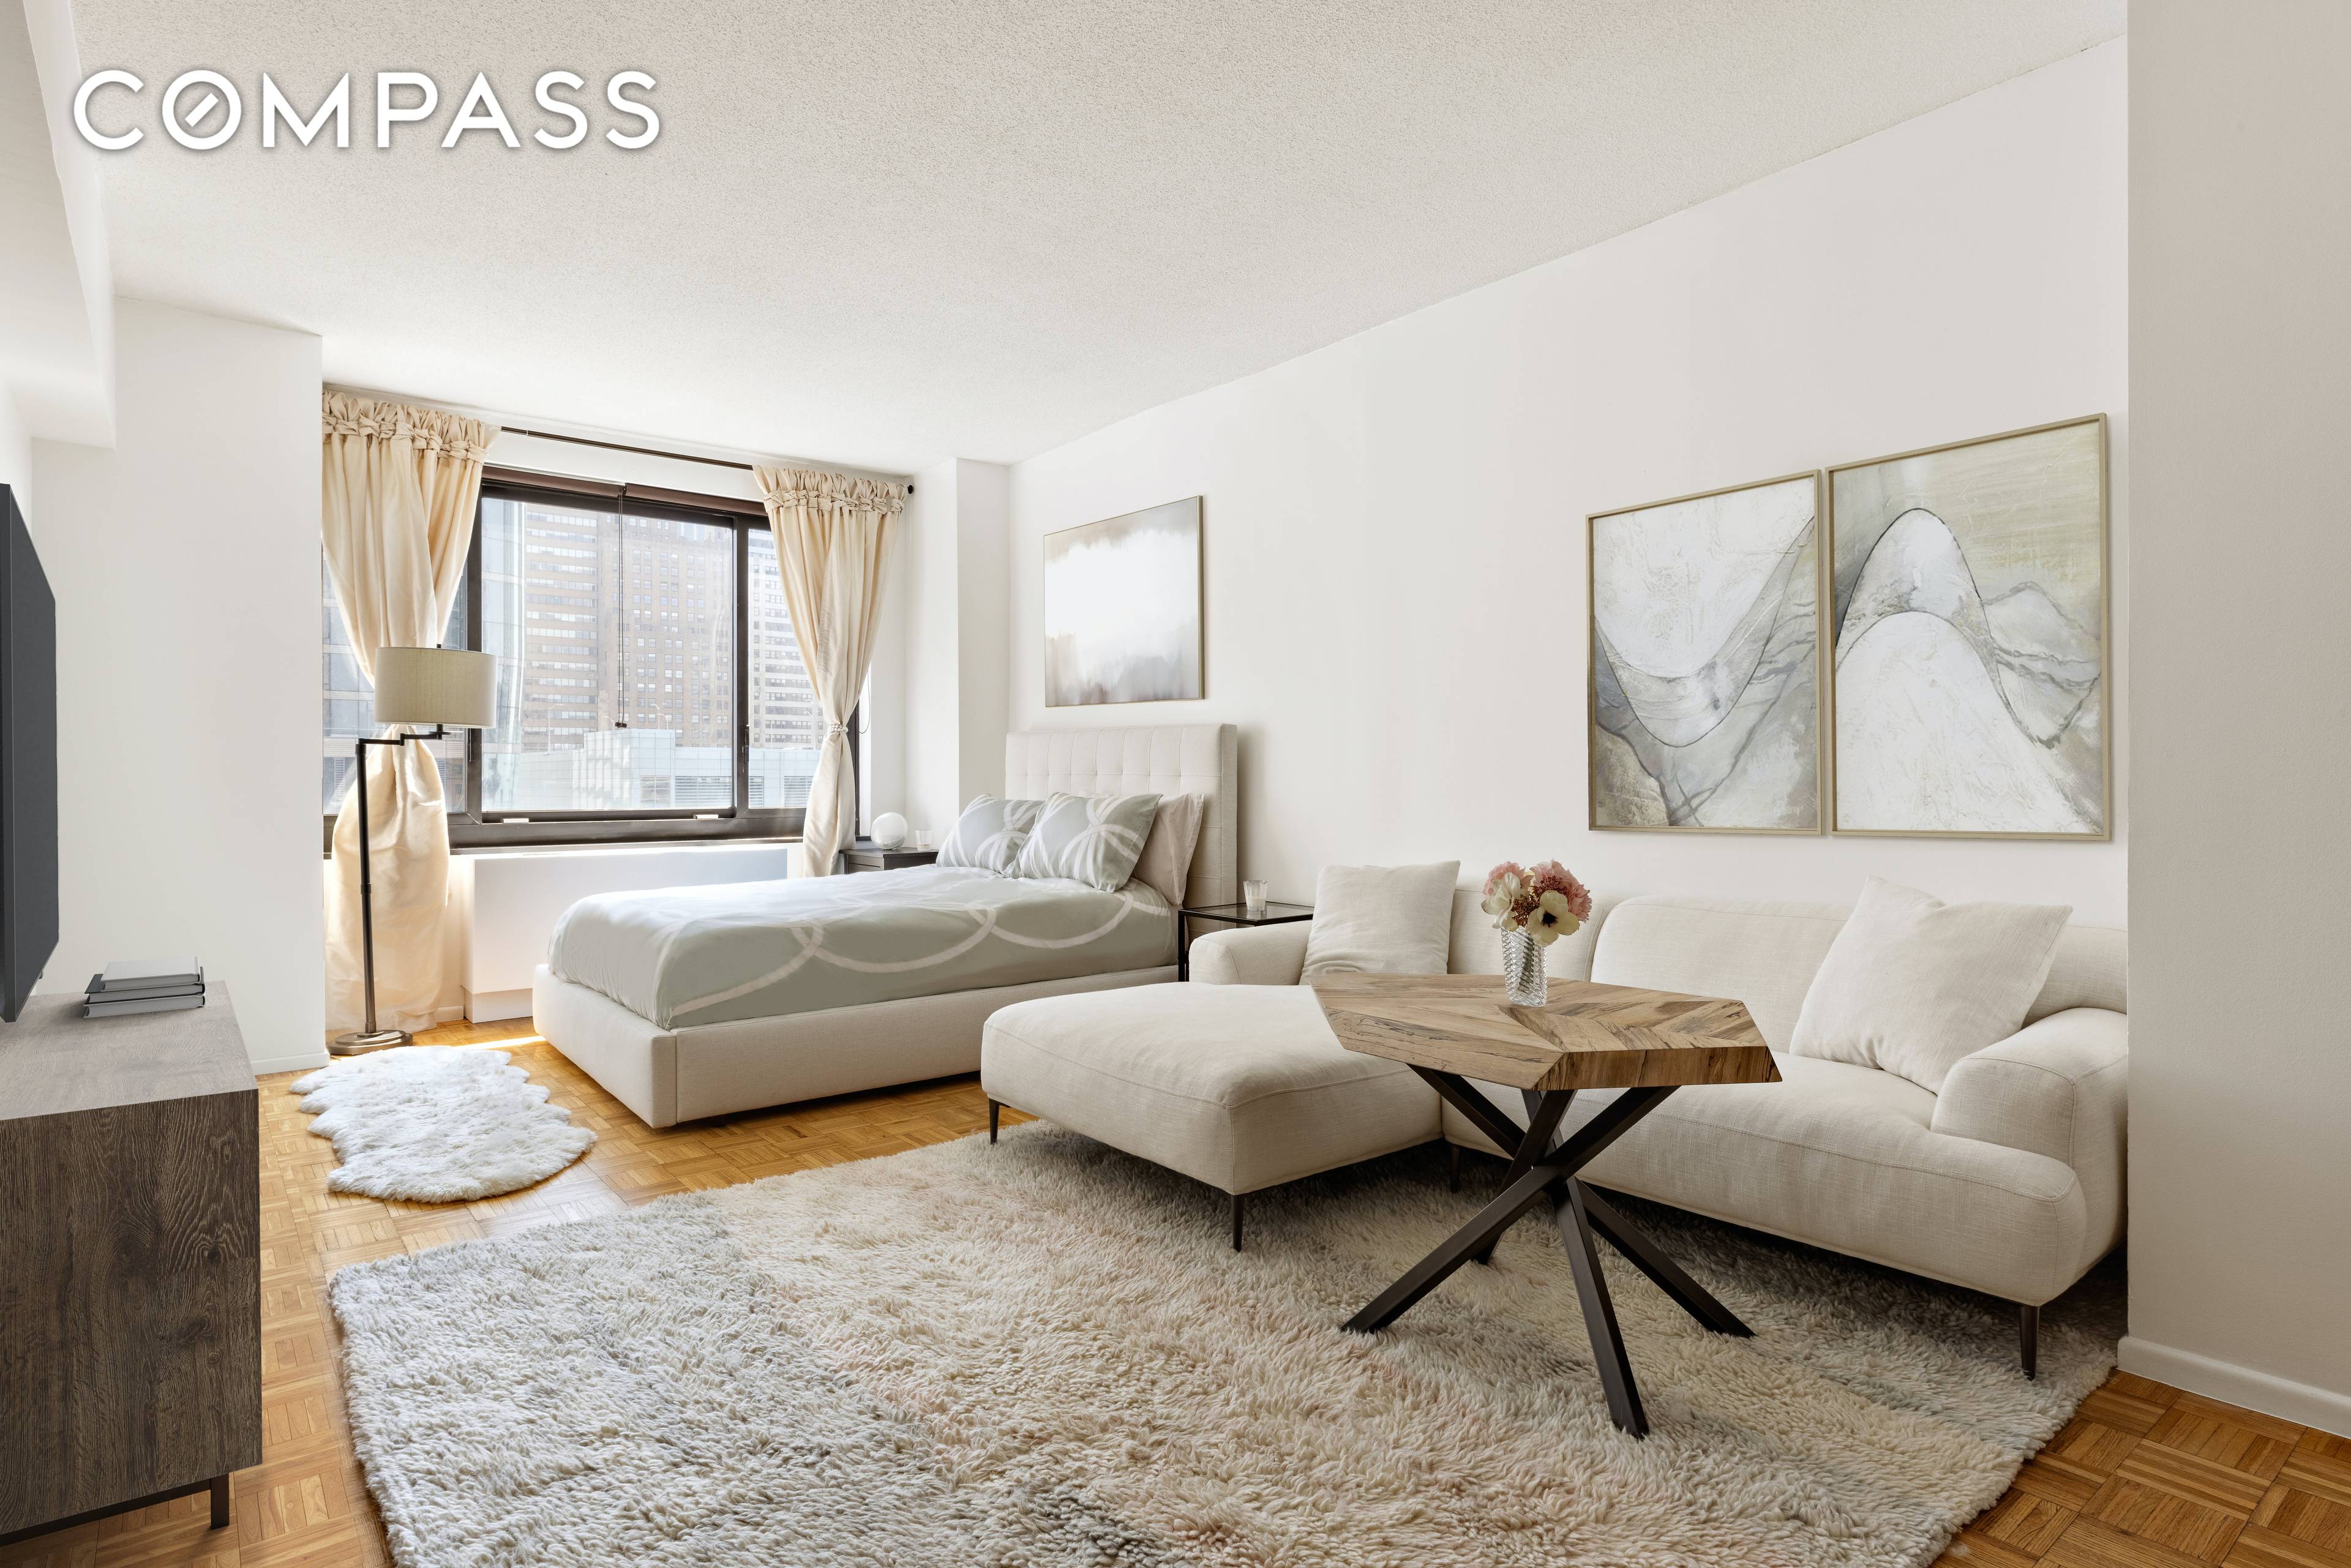 Alcove Studio Battery Park City Condominium Amazing Alcove studio, great natural light, and stunning views at Battery Park City s coveted Liberty Court !